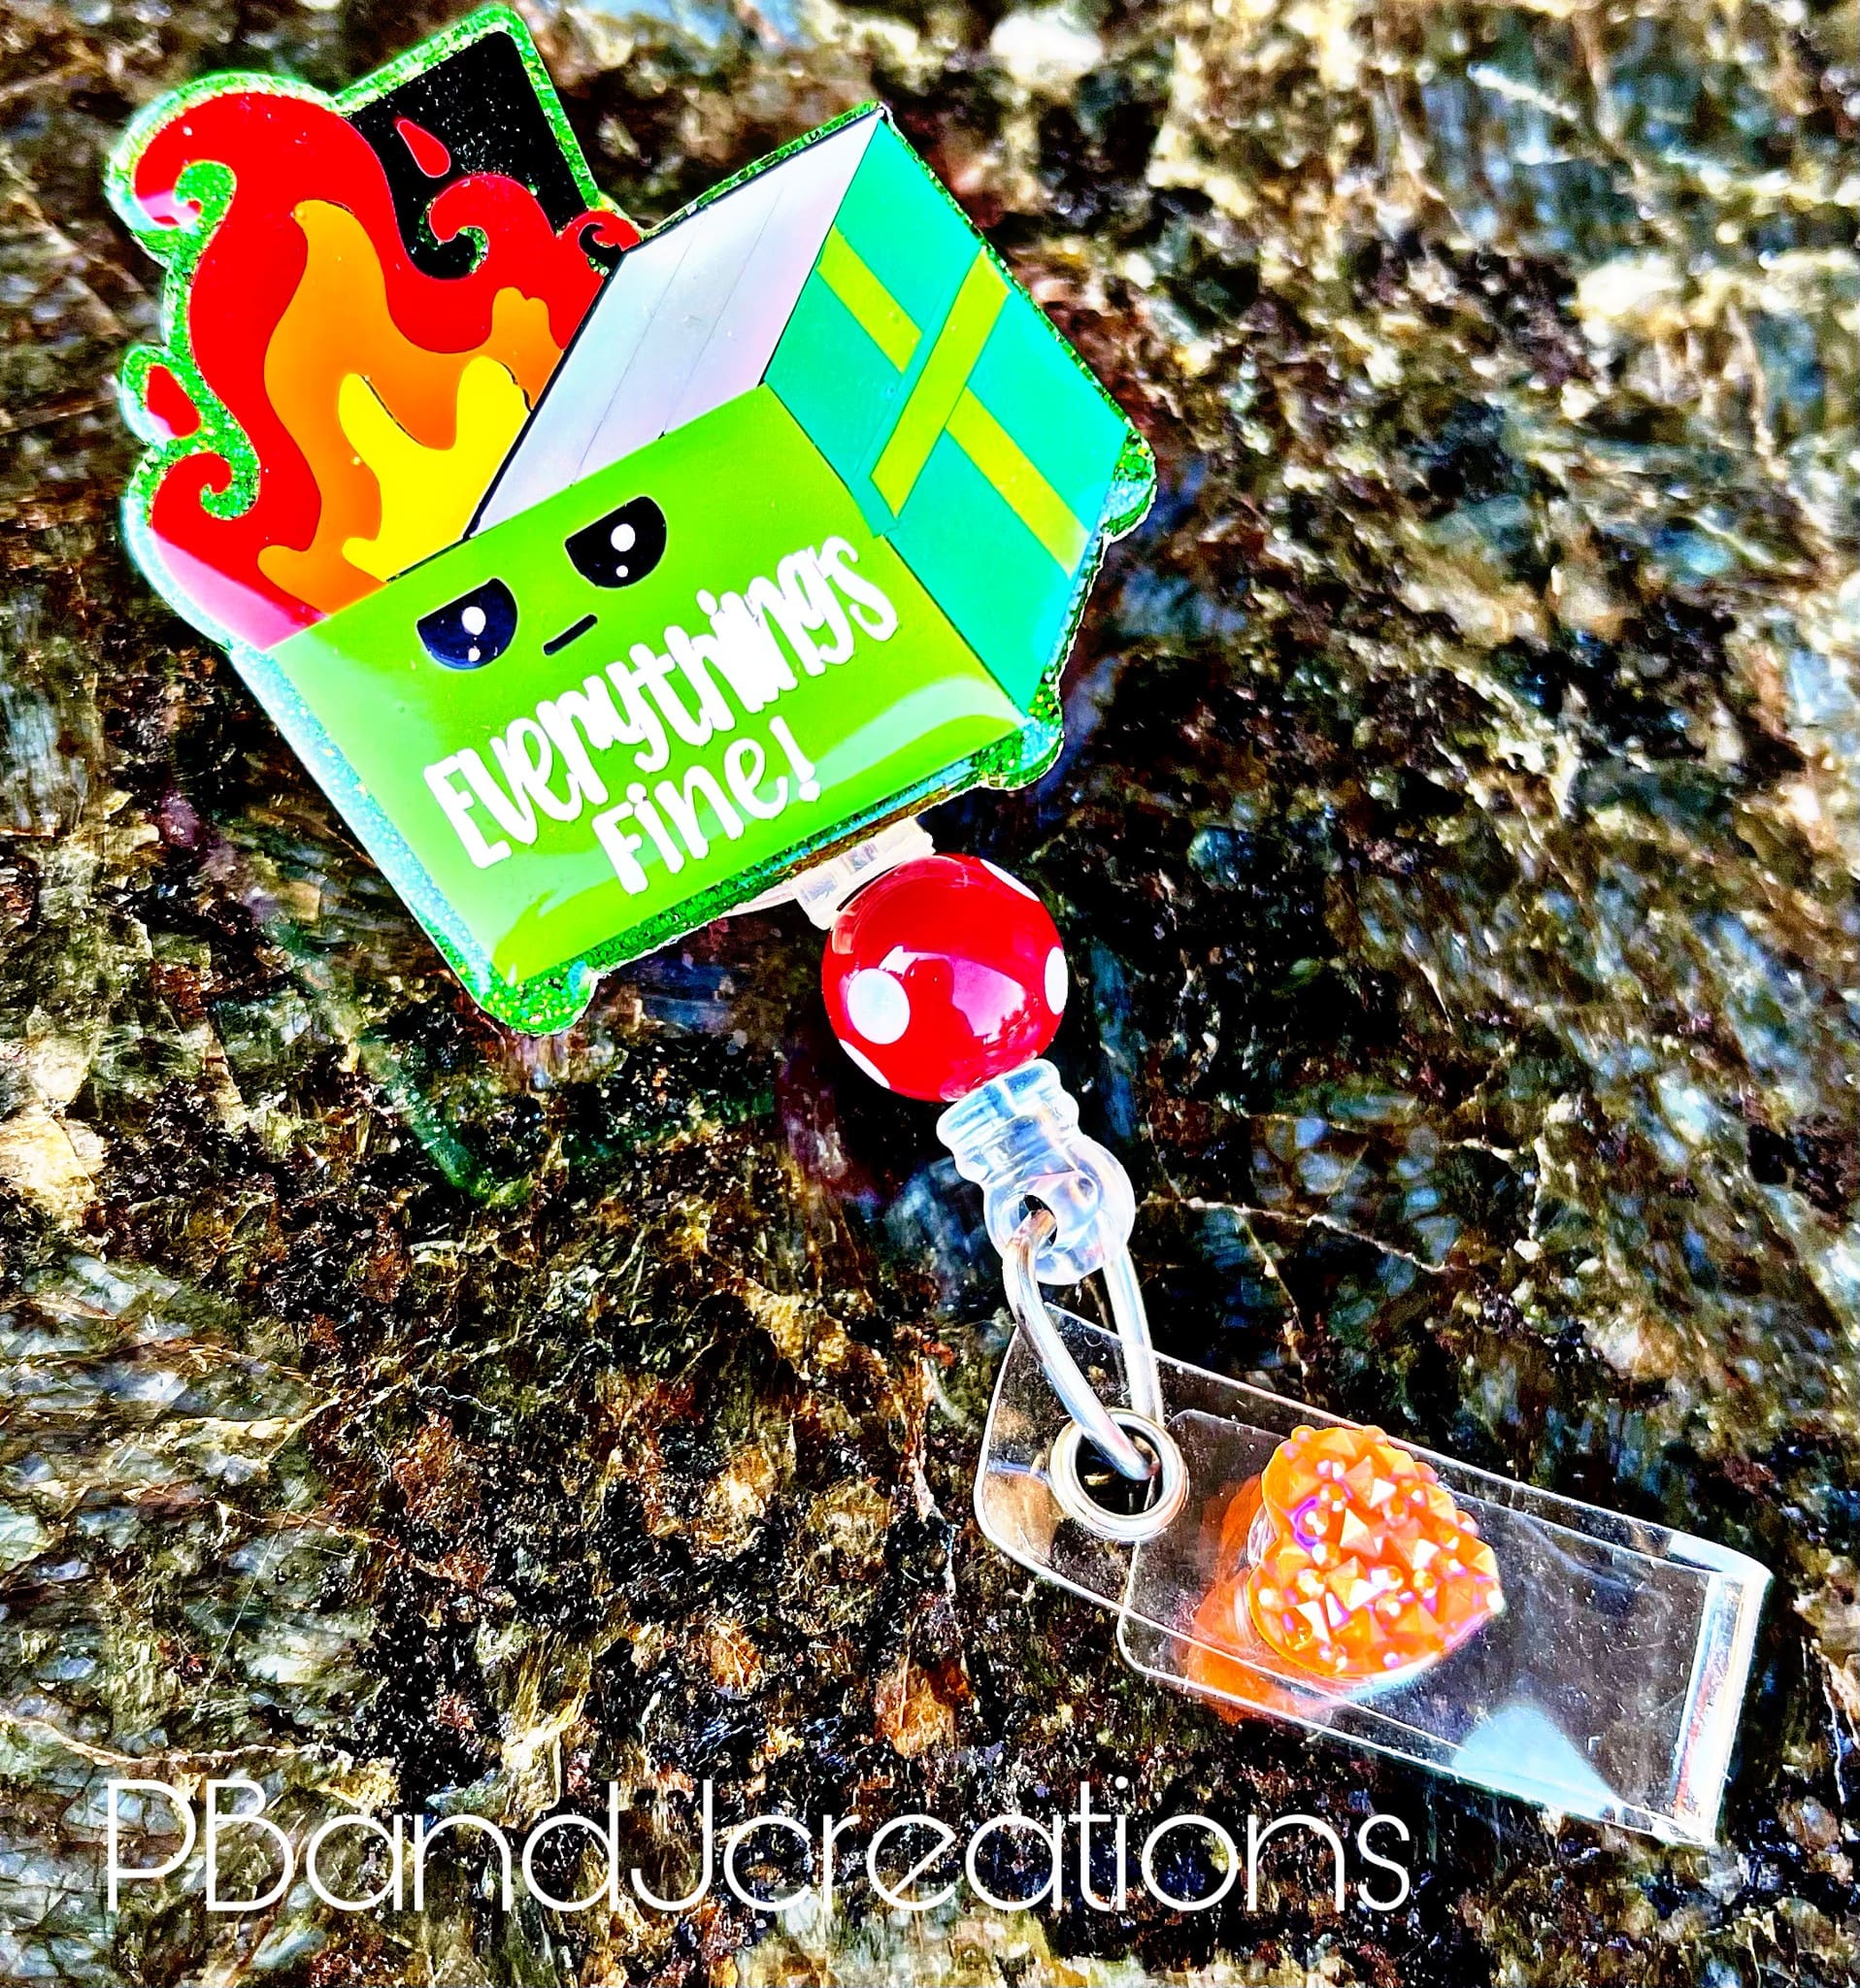 Dumpster Fire Badge reel – Craft and Chill RN